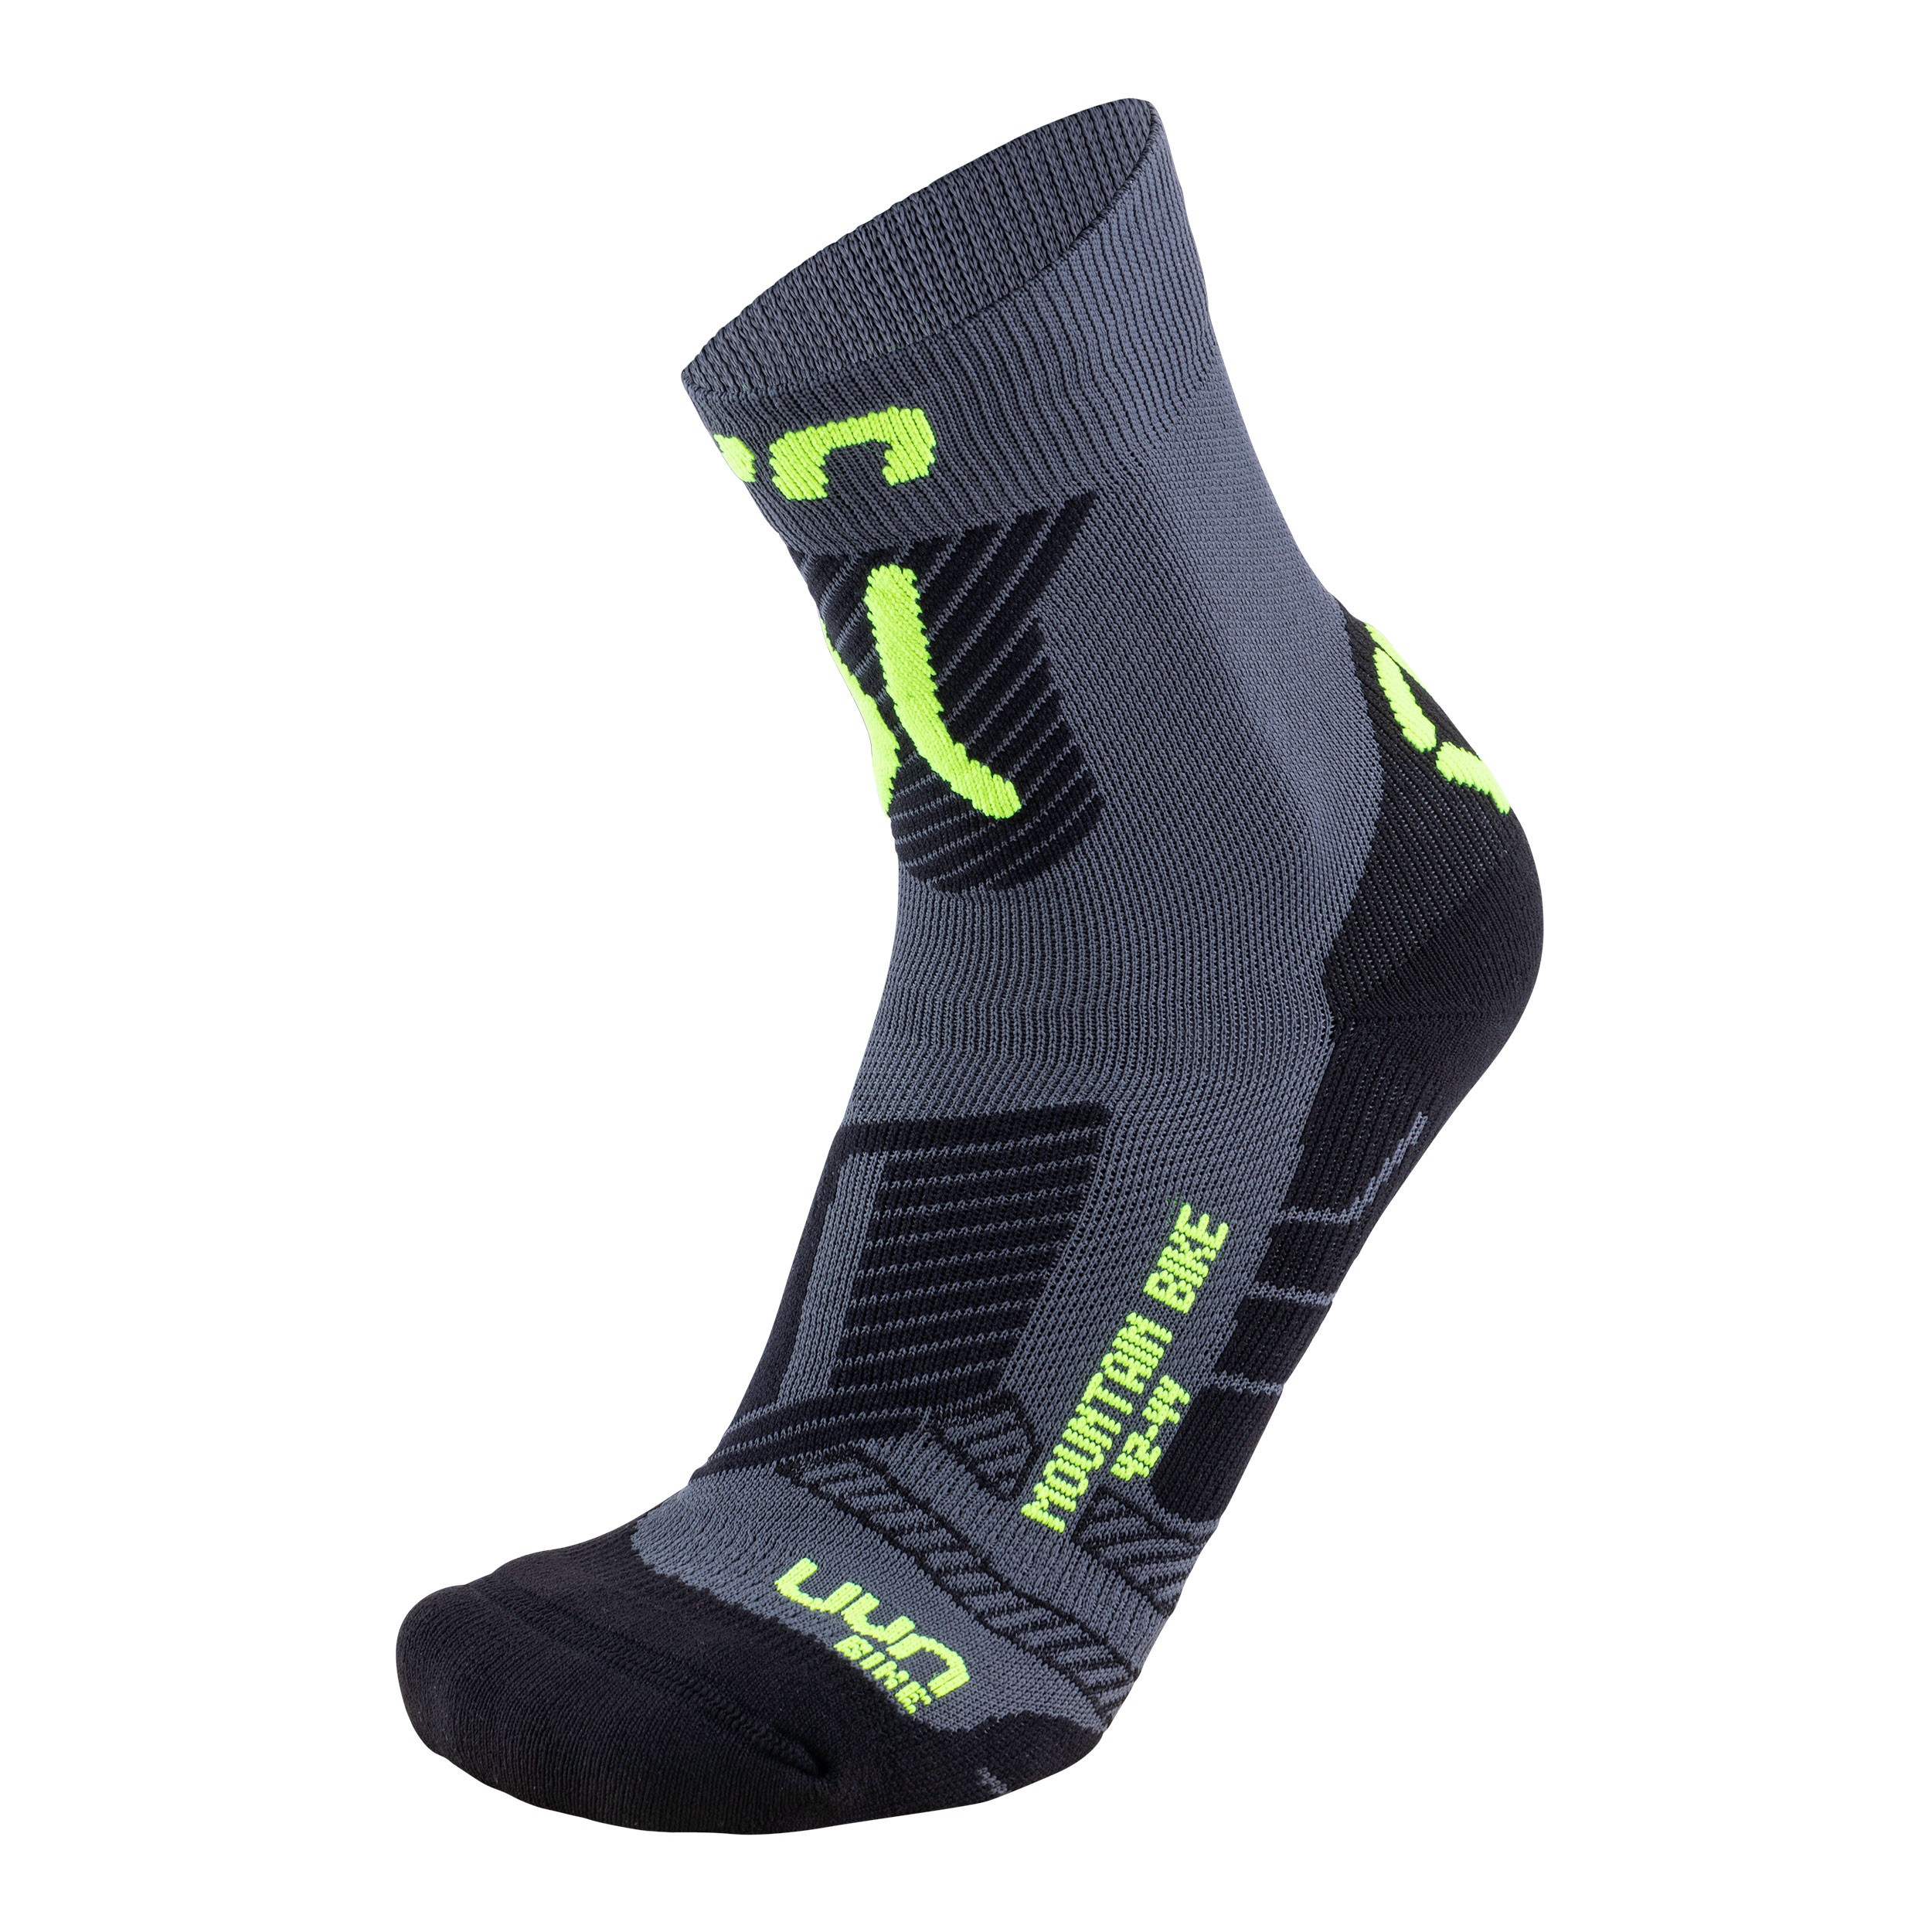 UYN cycling mtb chaussettes de cyclisme anthracite fluo jaune